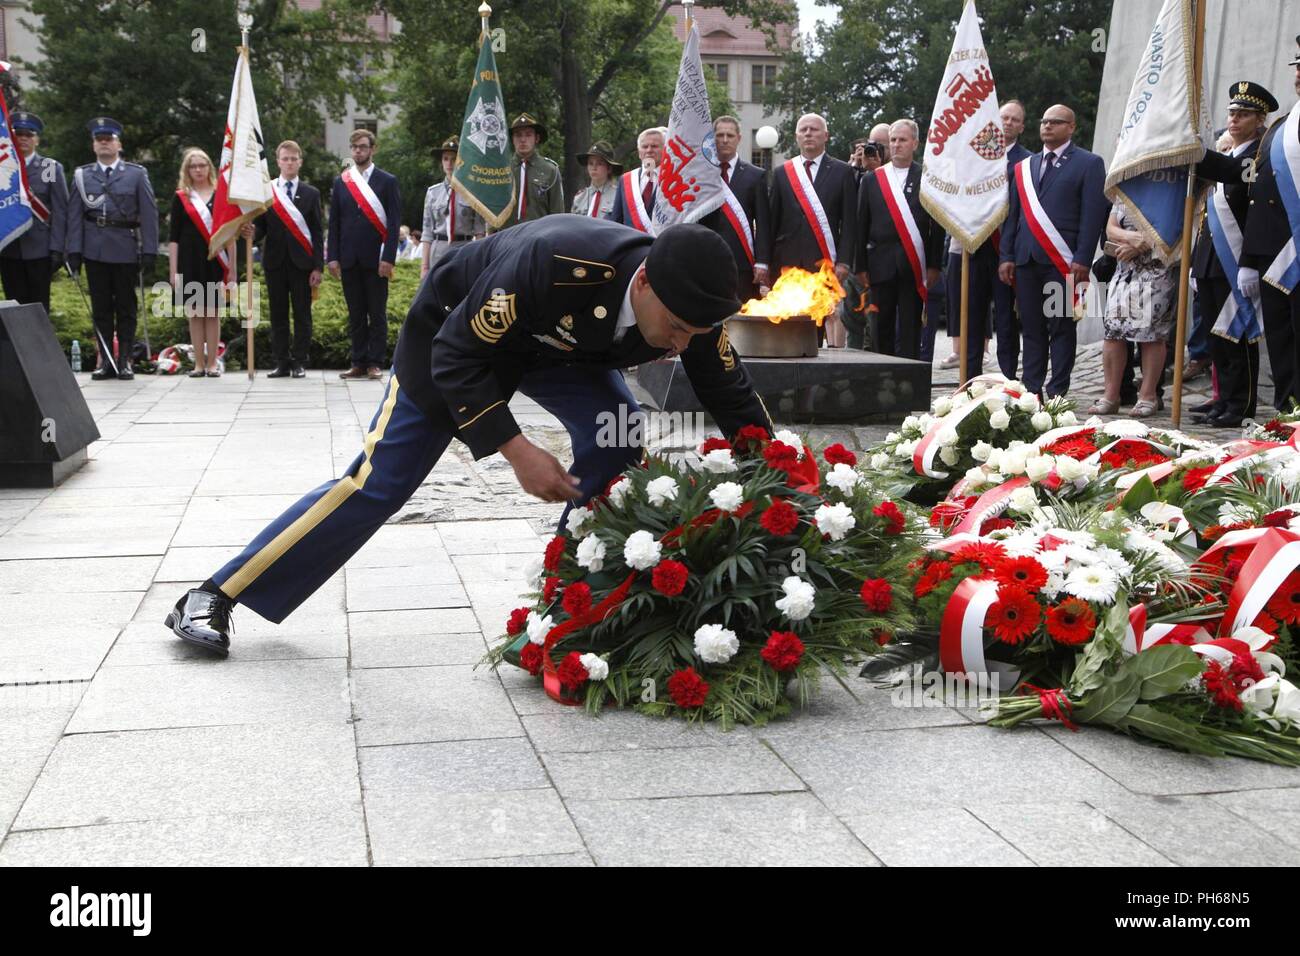 Sergeant Maj. Sael Garcia, 1st Infantry Division Mission Command Element sergeant major, commemorates the 1956 Poznań Uprising by laying a wreath on behalf of the United States Army during a ceremony June 28, 2018, at the Crosses monument in Poznań, Poland, in honor of the Polish citizens who stood up against communist rule 62 years ago. The massive protests in 1956 were the first of many in which hundreds of Polish people sacrificed their lives for the independence of Poland. Hundreds of Polish citizens, including uprising participants, attended the ceremony. Also in attendance were Brig. Gen Stock Photo